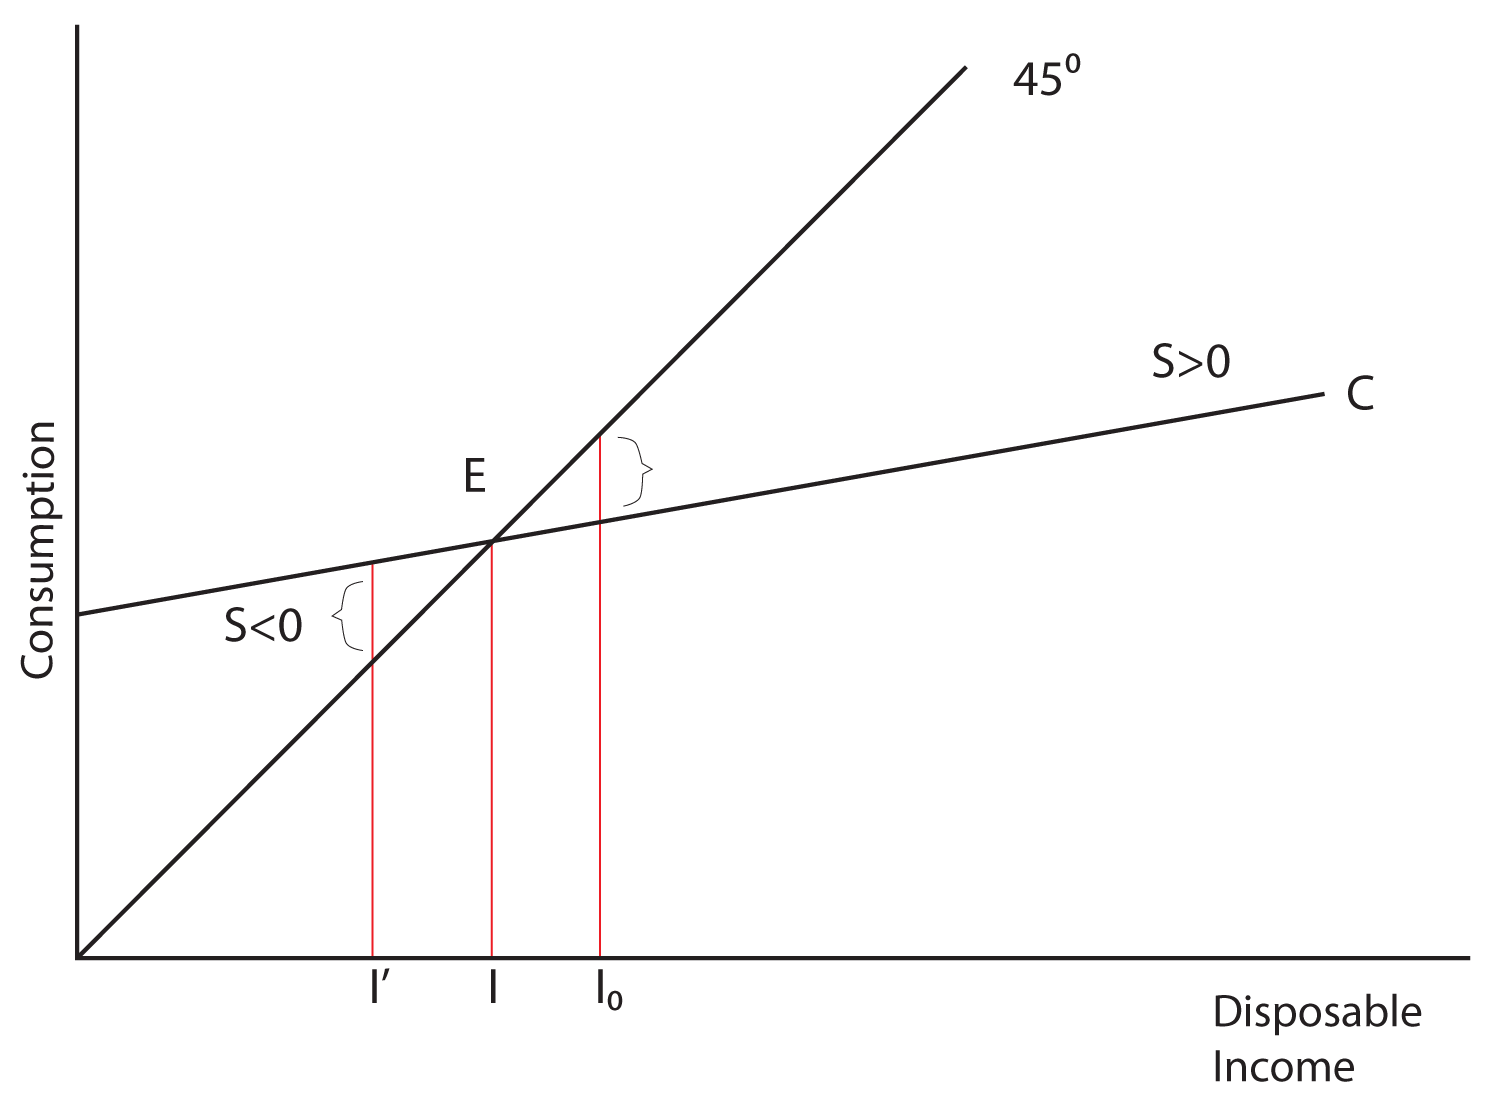 Image 6.01 Consumption and Savings. This image depicts Disposable Income on the X axis and Consumption on the Y axis. A line beginning at the origin follows an increasing slope at a 45 degree angle as the X value increases; it is labeled 45 degrees. A second line beginning farther up the Y axis follows an increasing slope, at less than a 45 degree angle, as the X value increases; it is labeled C. The point where these two lines intersect is labeled E. Three red lines extend vertically from the X axis to three different points on the two crossed lines. The line to the left of the intersecting point E is labeled l'. The middle line connects to point E and is labeled l. The line to the left of point E is labeled l subscript 0. l' emphasizes the distance between the intersecting lines to the left of point E and is labeled S < 0. l subscript 0 emphasizes the distance between the intersecting lines to the right of point E and is labeled S > 0.